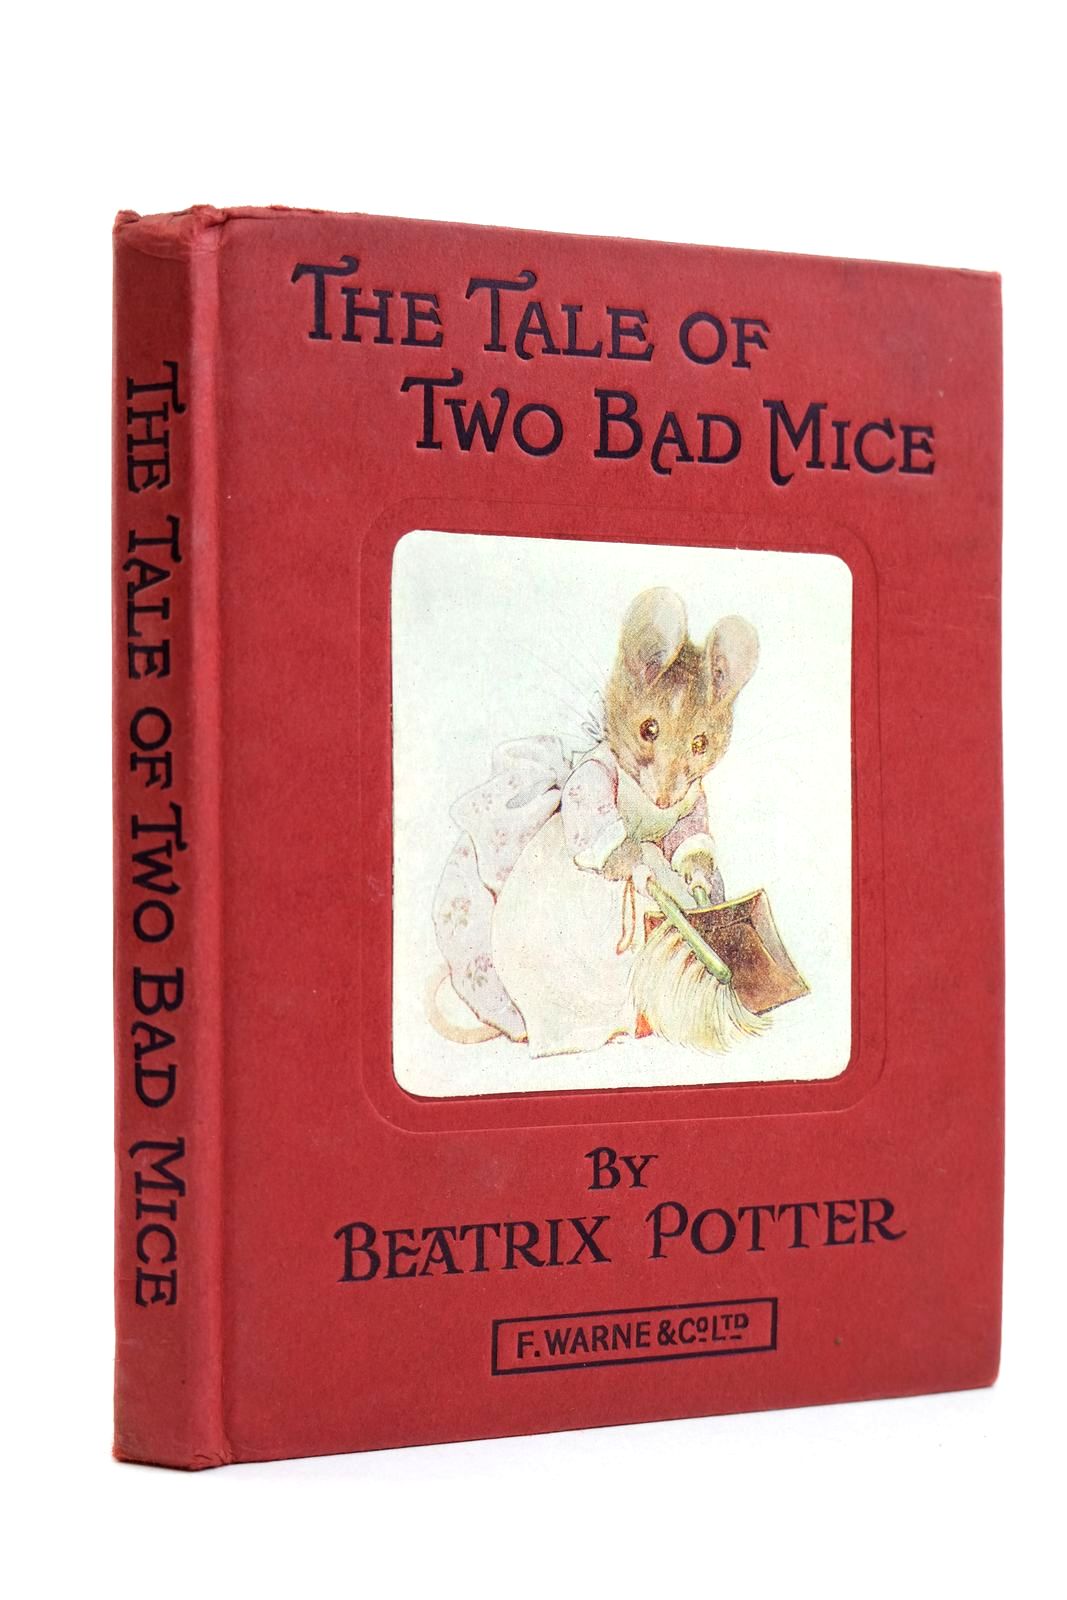 Photo of THE TALE OF TWO BAD MICE written by Potter, Beatrix illustrated by Potter, Beatrix published by Frederick Warne &amp; Co Ltd. (STOCK CODE: 2131891)  for sale by Stella & Rose's Books